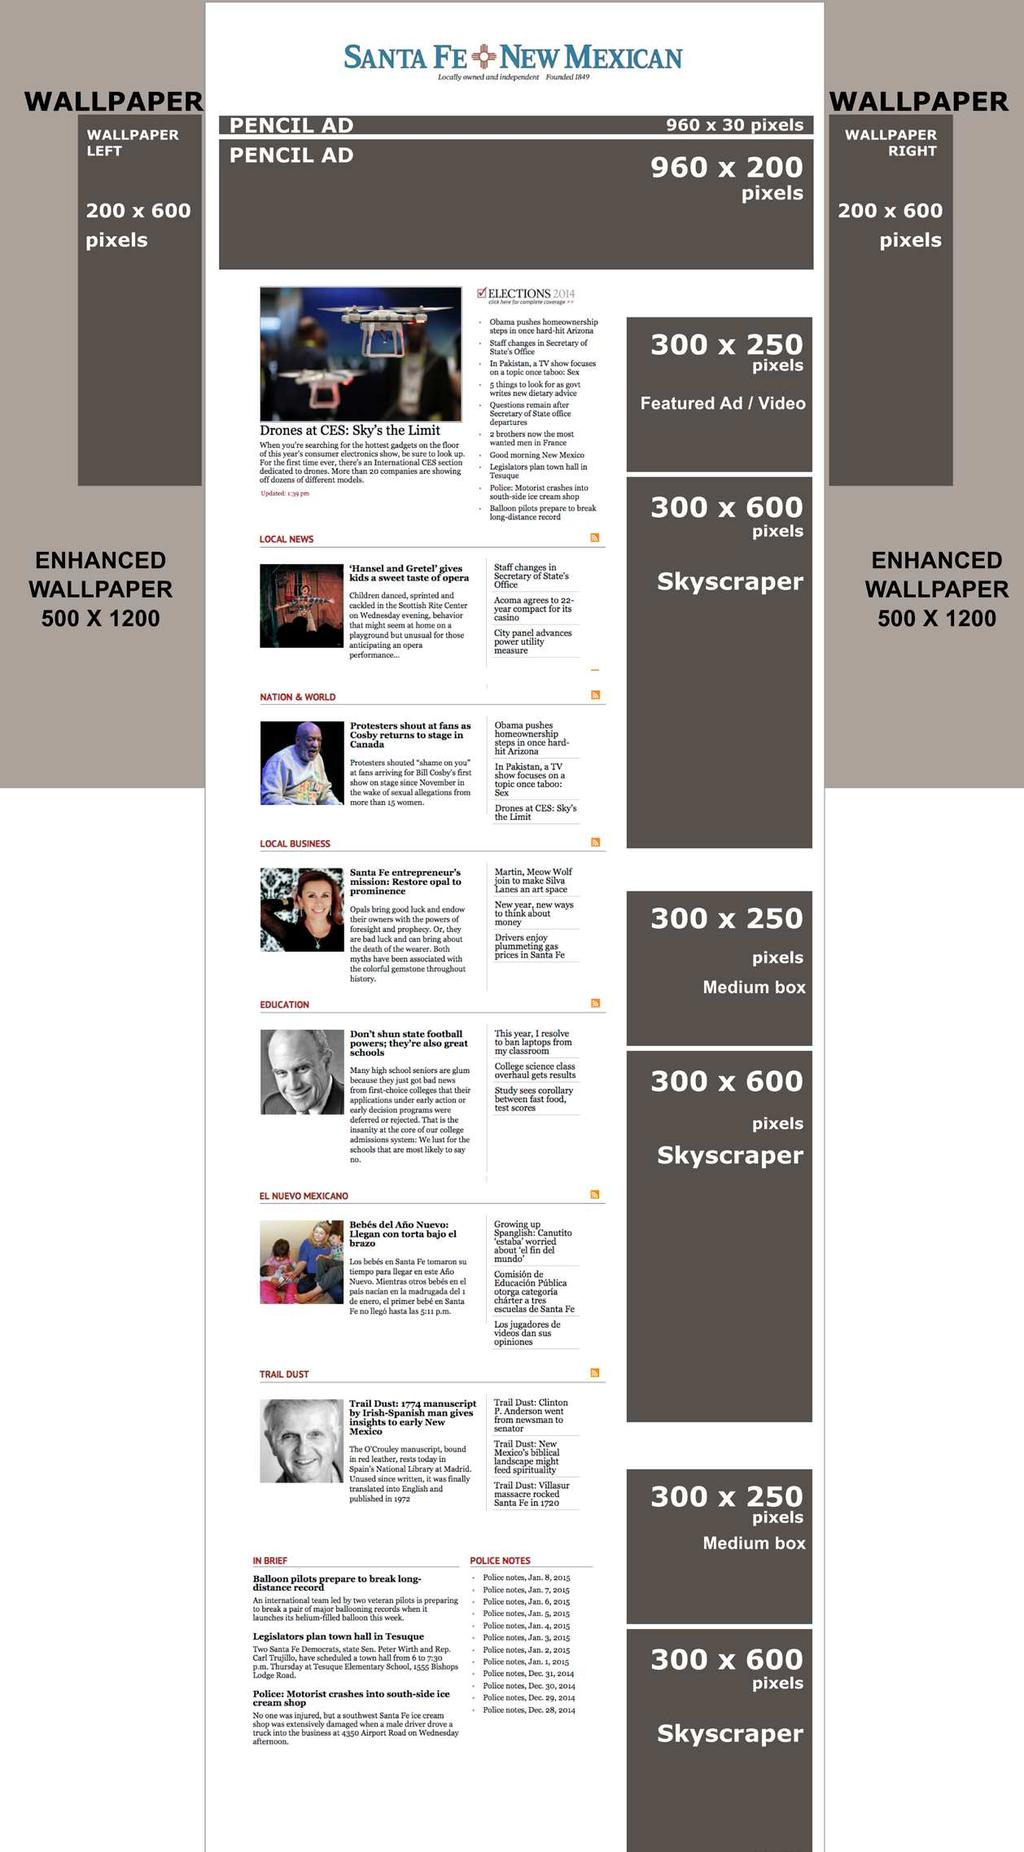 300 x 150 Newsletter - Content - Ad 01 right